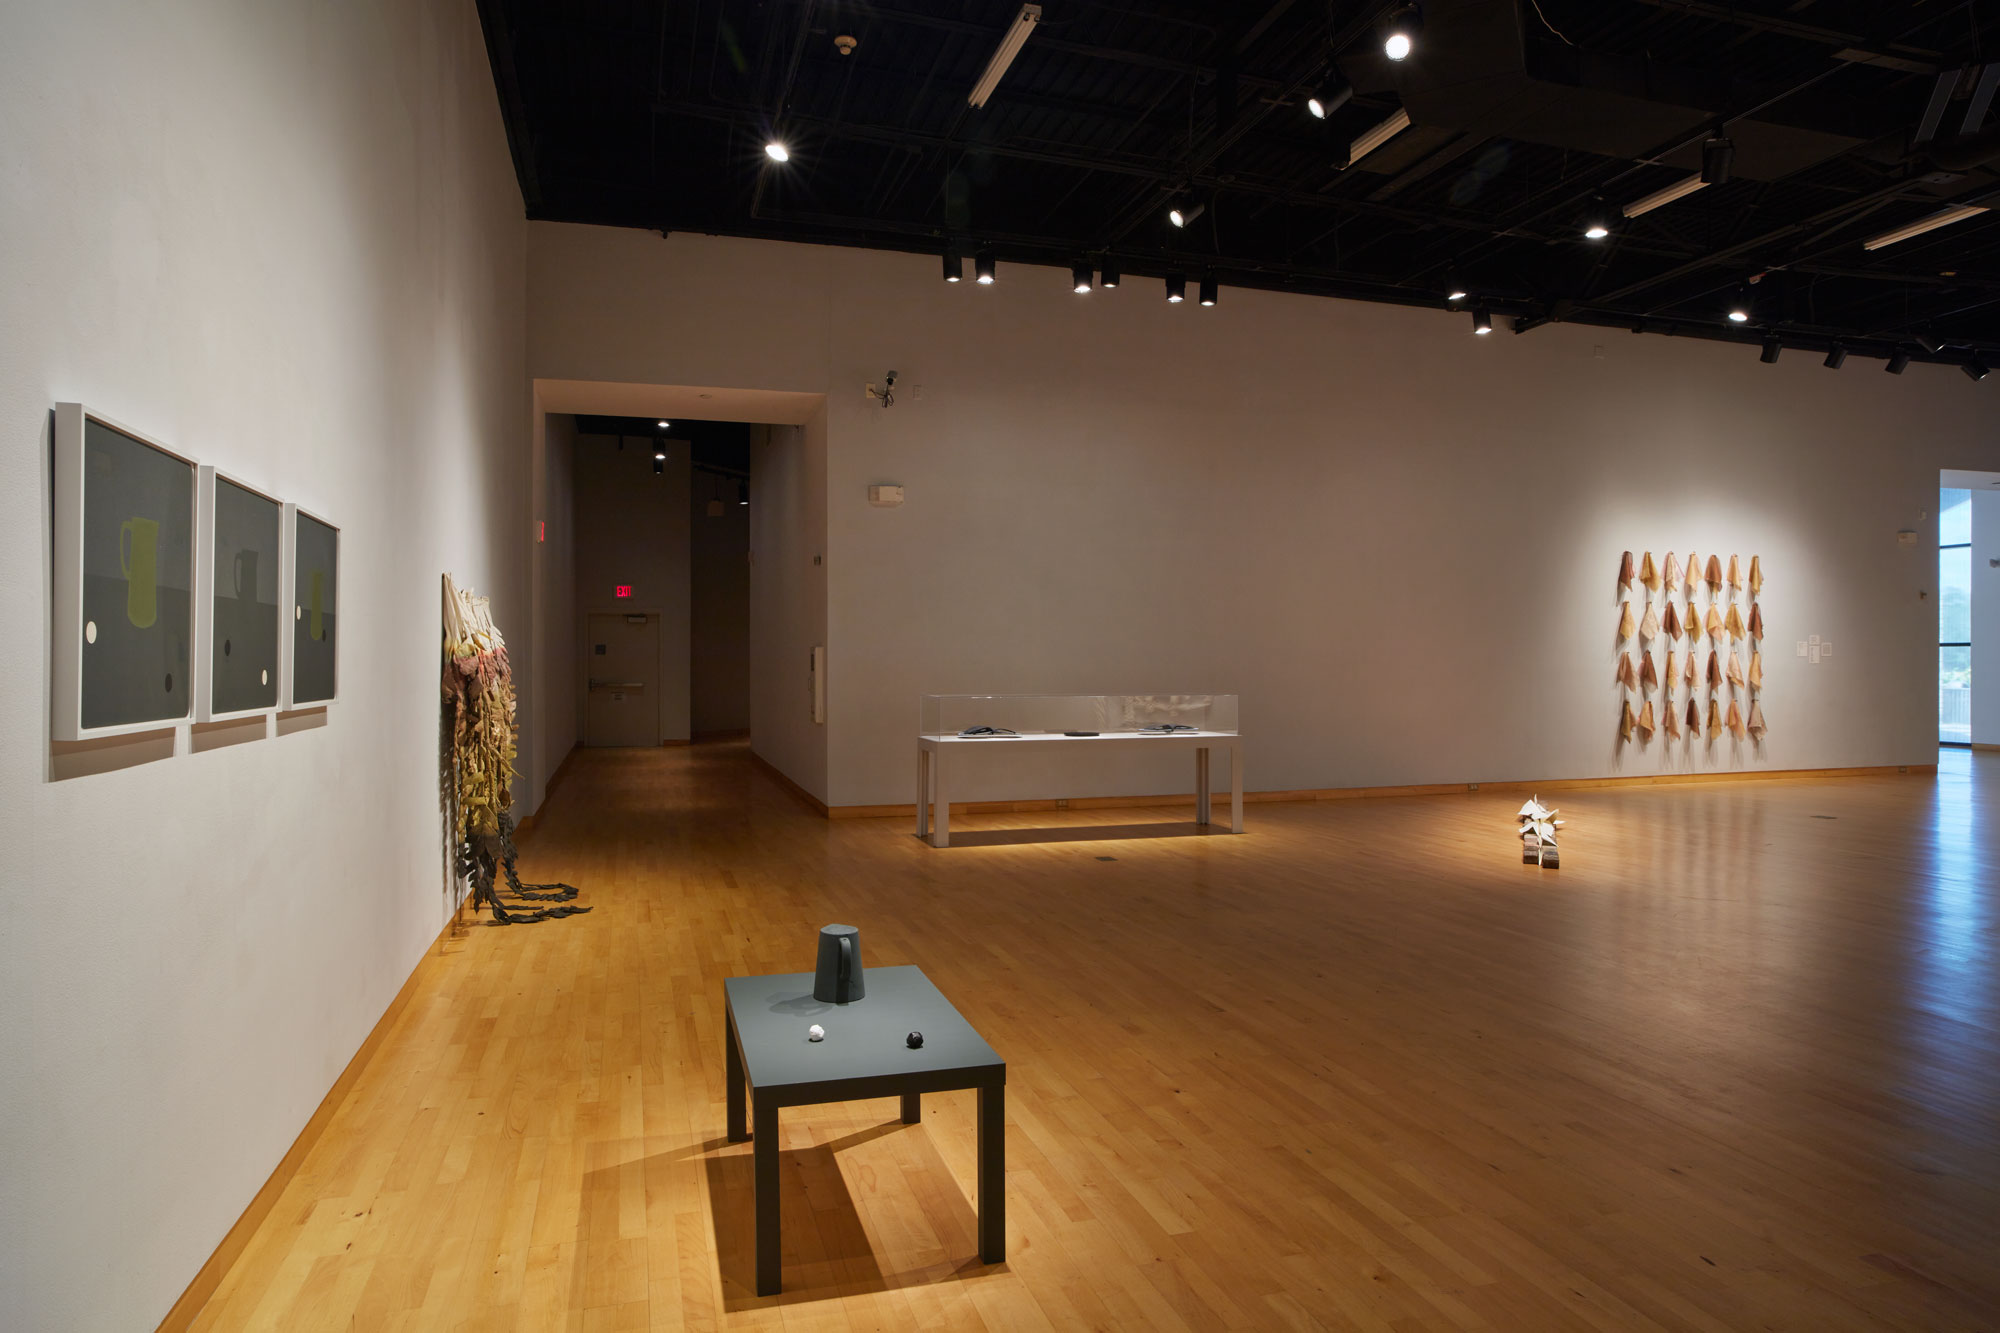 Installation view of Skyway 20/21 exhibition at USF Contemporary Art Museum. Left to right: works by Ry McCullough, Cynthia Mason, and Rosemarie Chiarlone. Photo: Will Lytch.